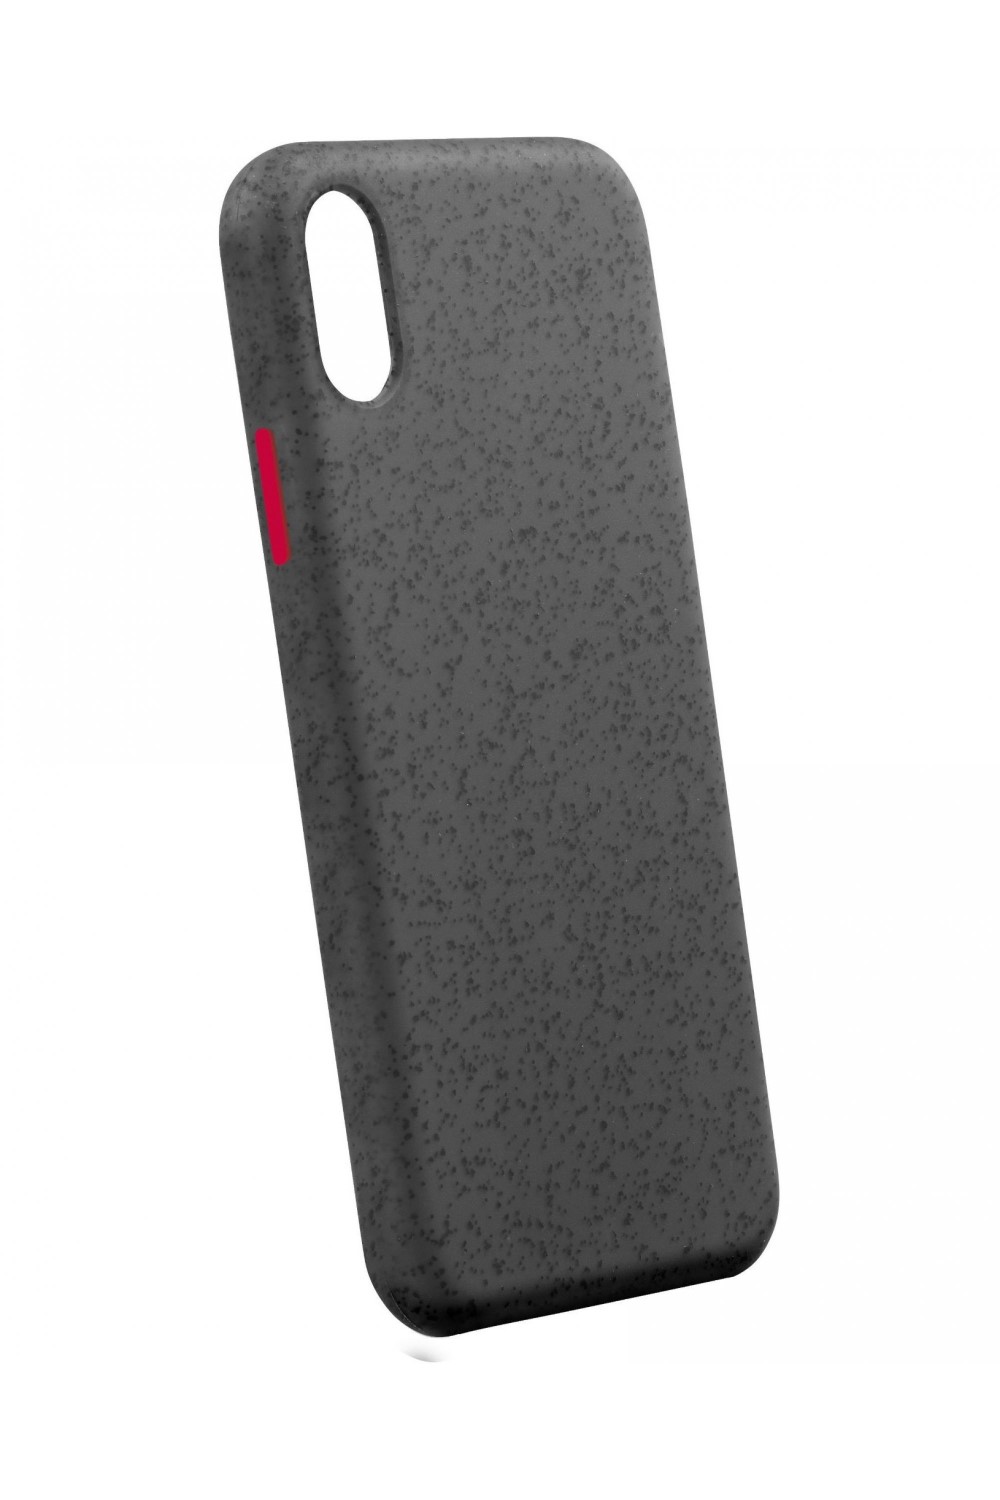 CellularLine Mineral Case Black for iPhone XS